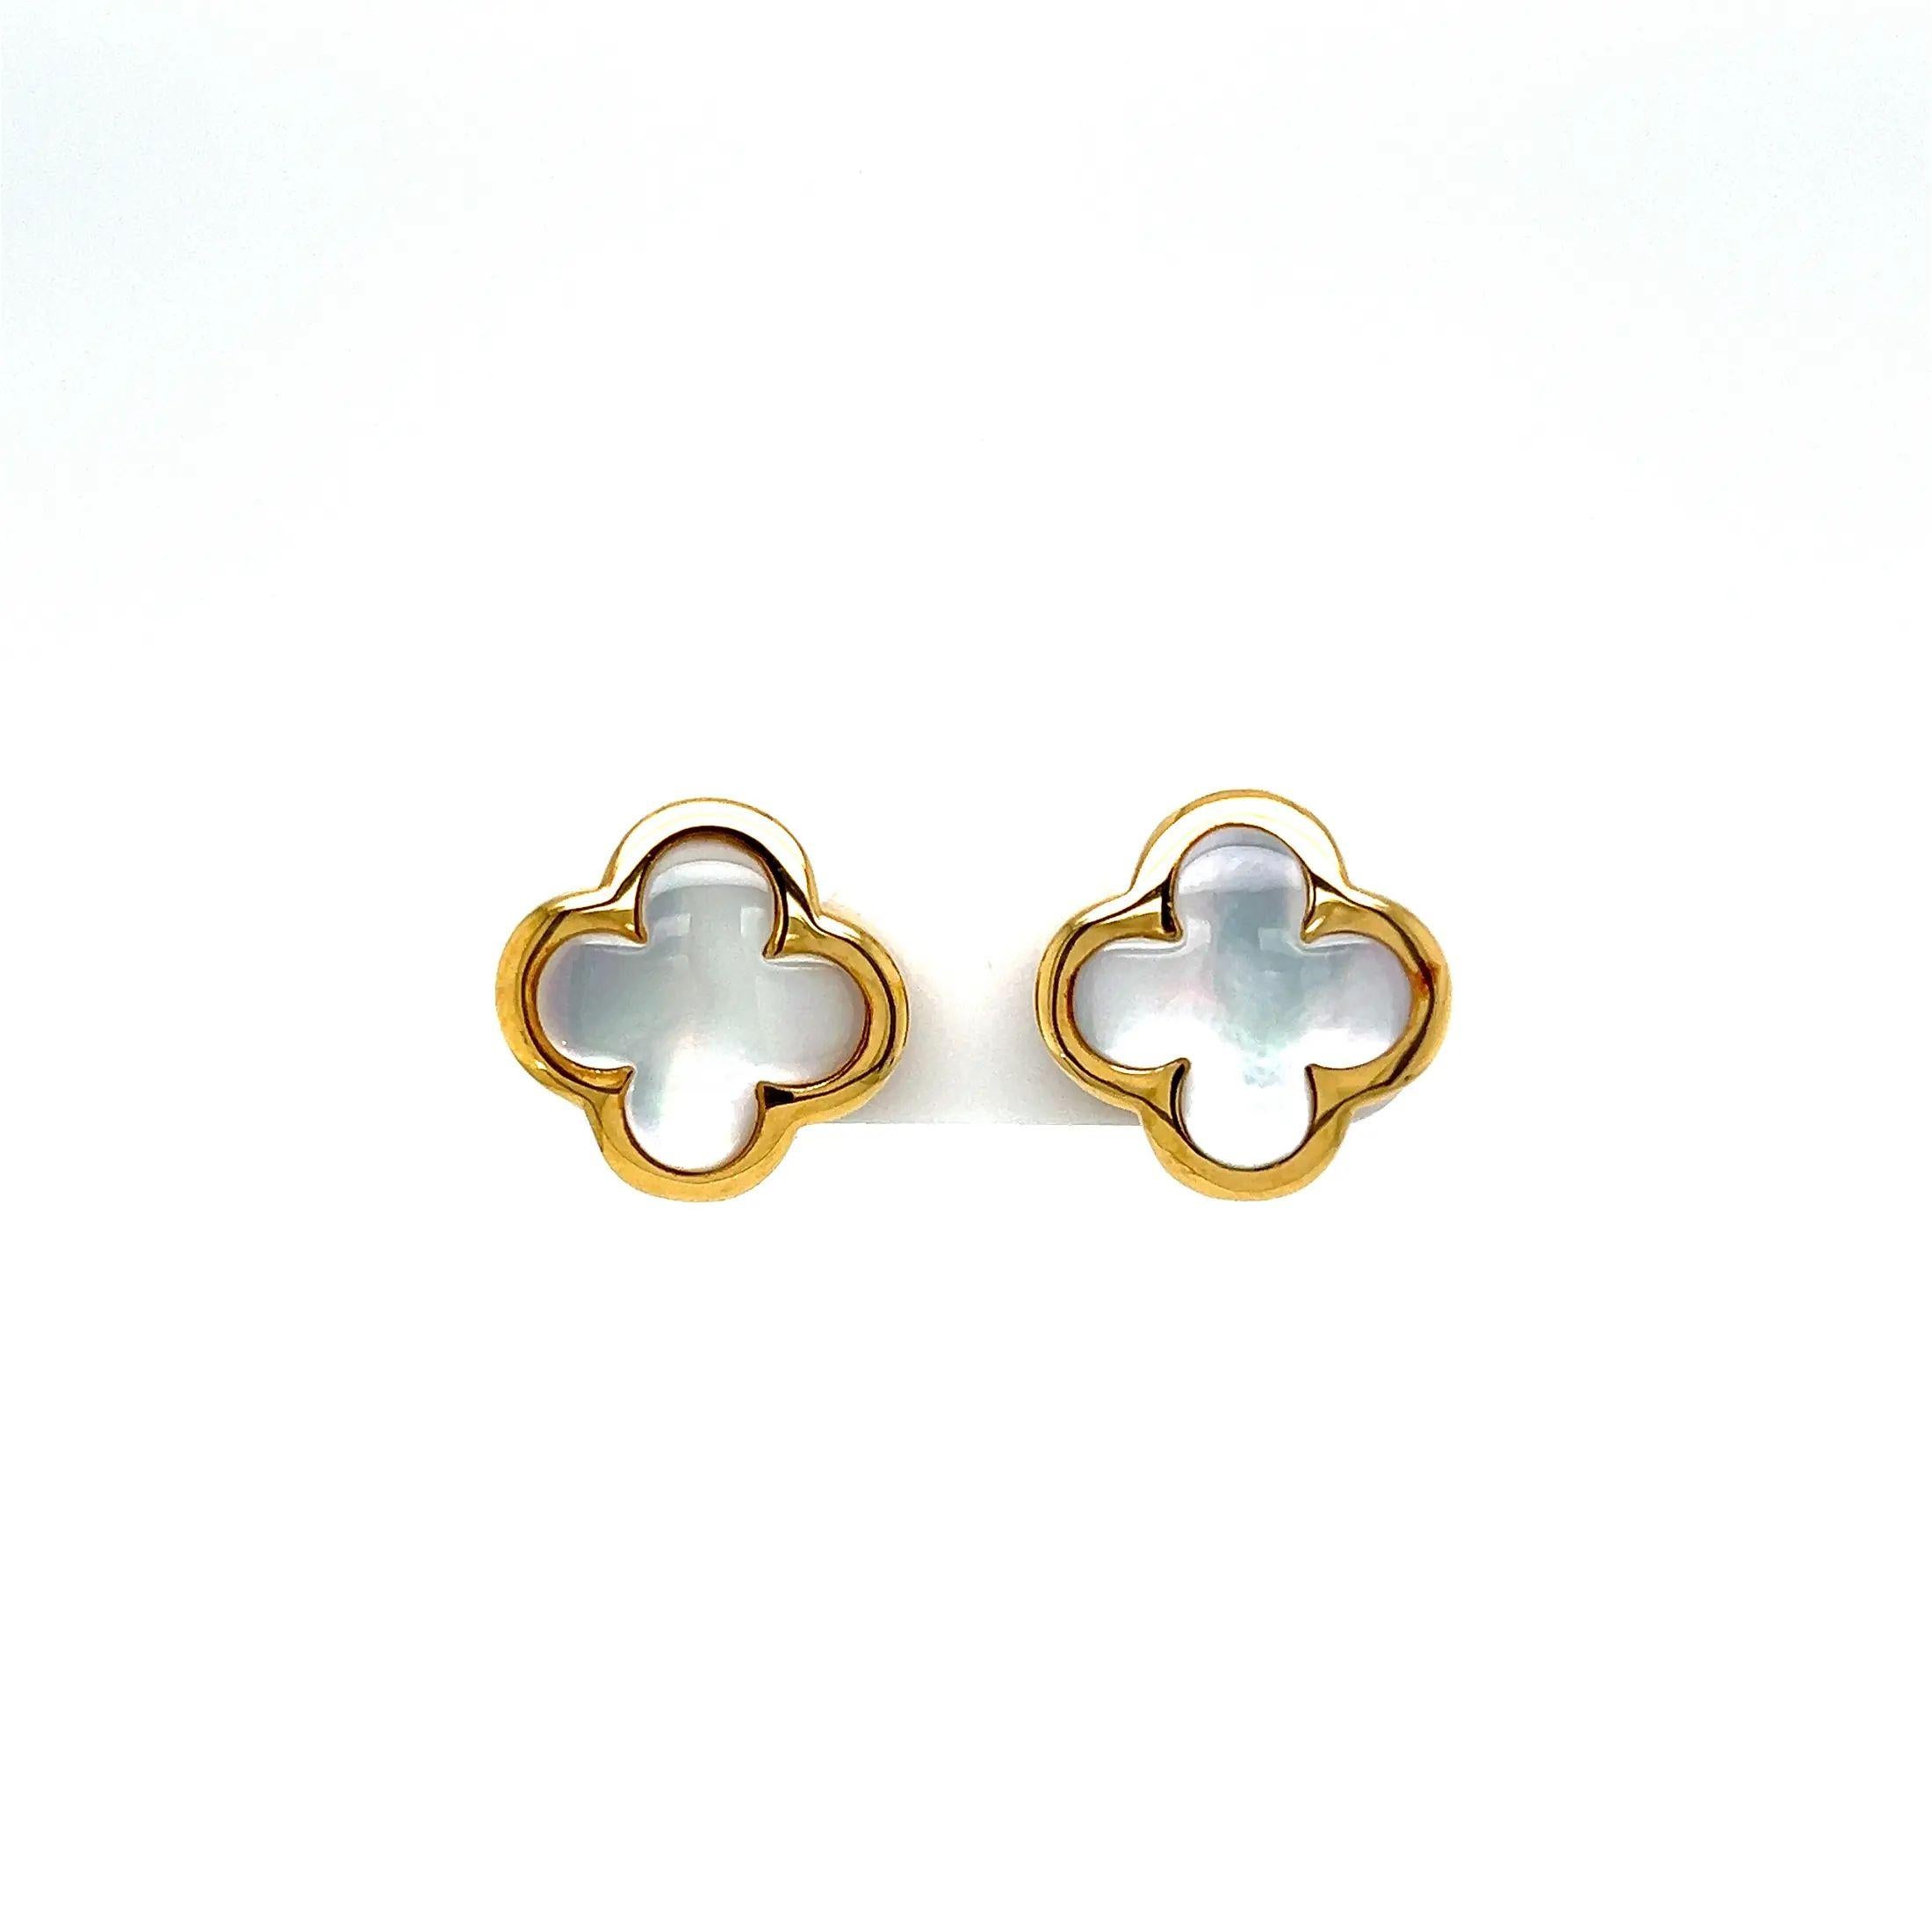 Simply Beautiful! Finely detailed Hand-Crafted Alhambra Clover Mother of Pearl MOP Gold Earrings. Featuring lustrous, creamy white Mother of Pearl Hand set in 18K yellow Gold setting. The earrings measure approx. 0.6